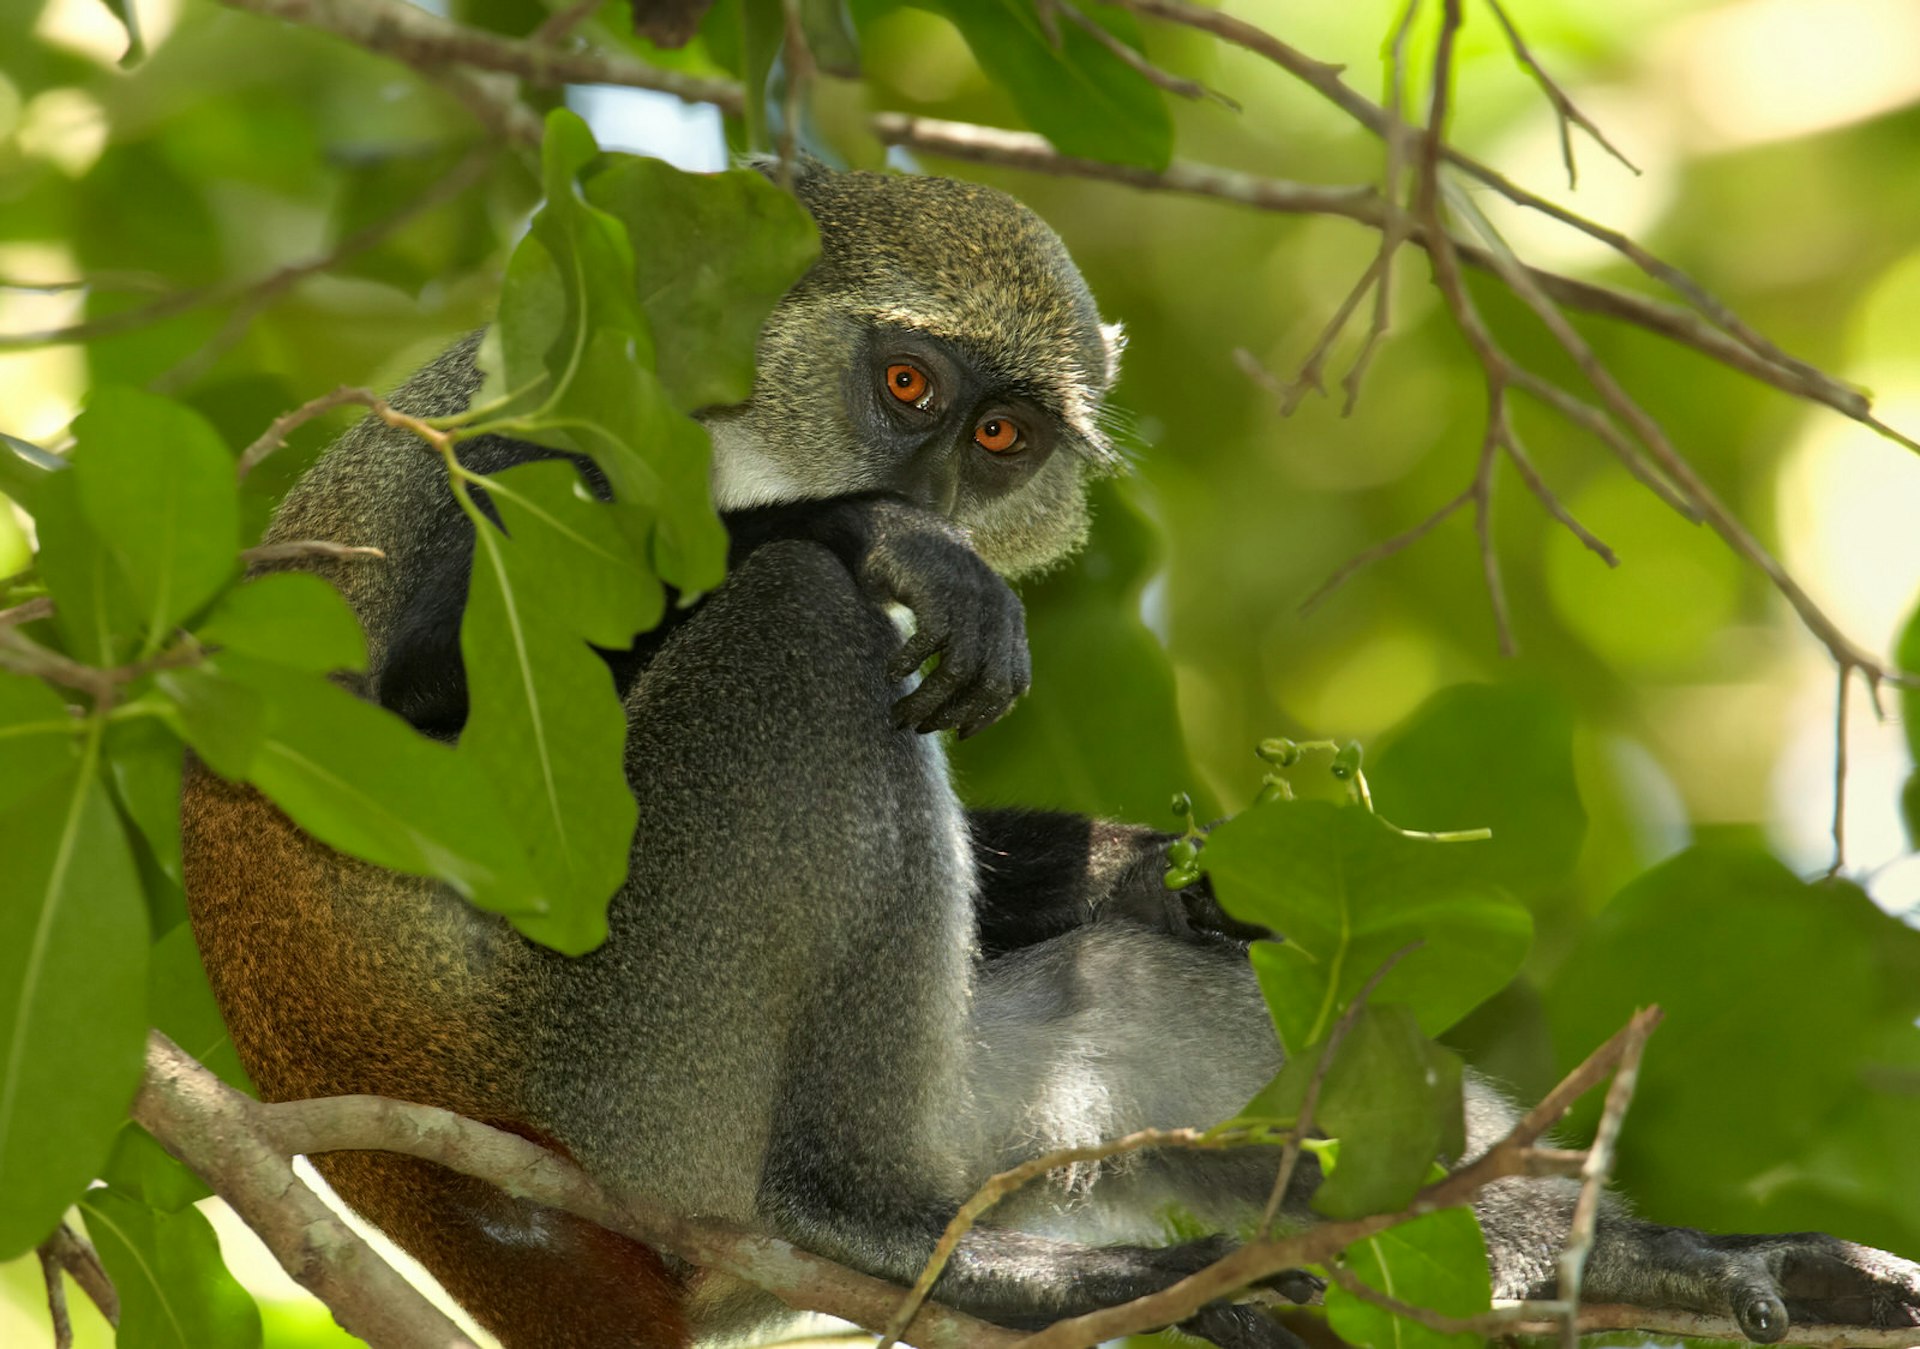 Surrounded by lush leaves, a Sykes' monkey hides. Its eyes are a brilliant orange with black pupils, while its fur is short and thick - mostly grey, but with a ginger tinge on its back. It has white fur on its shoulders and on its head.